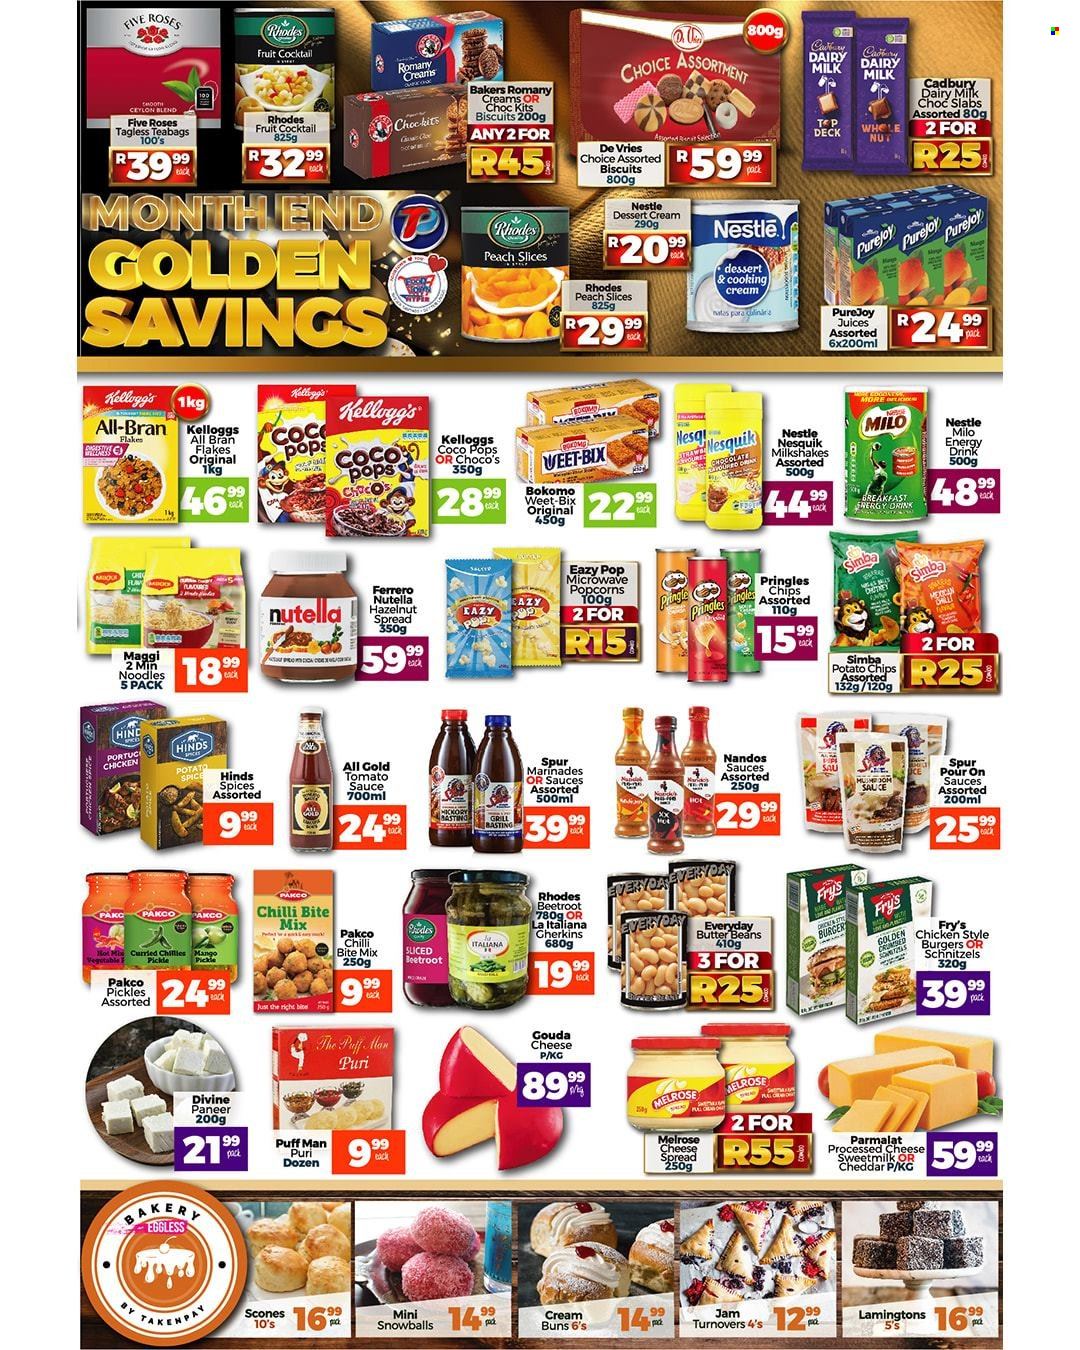 Take n Pay specials - 09.28.2021 - 10.03.2021. 